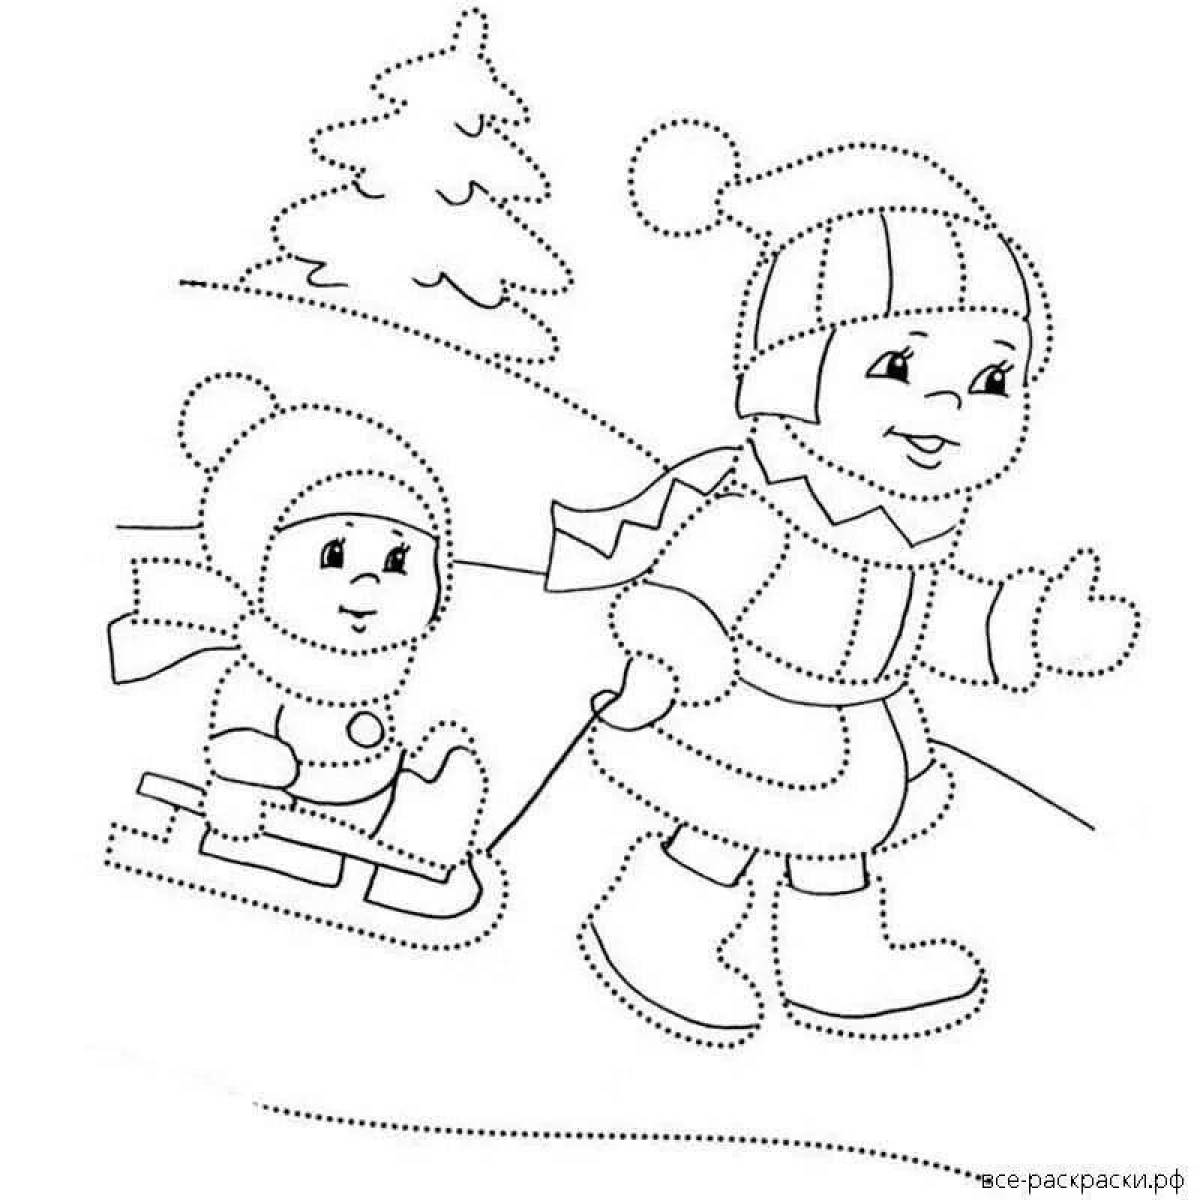 Exquisite coloring drawing of winter fun